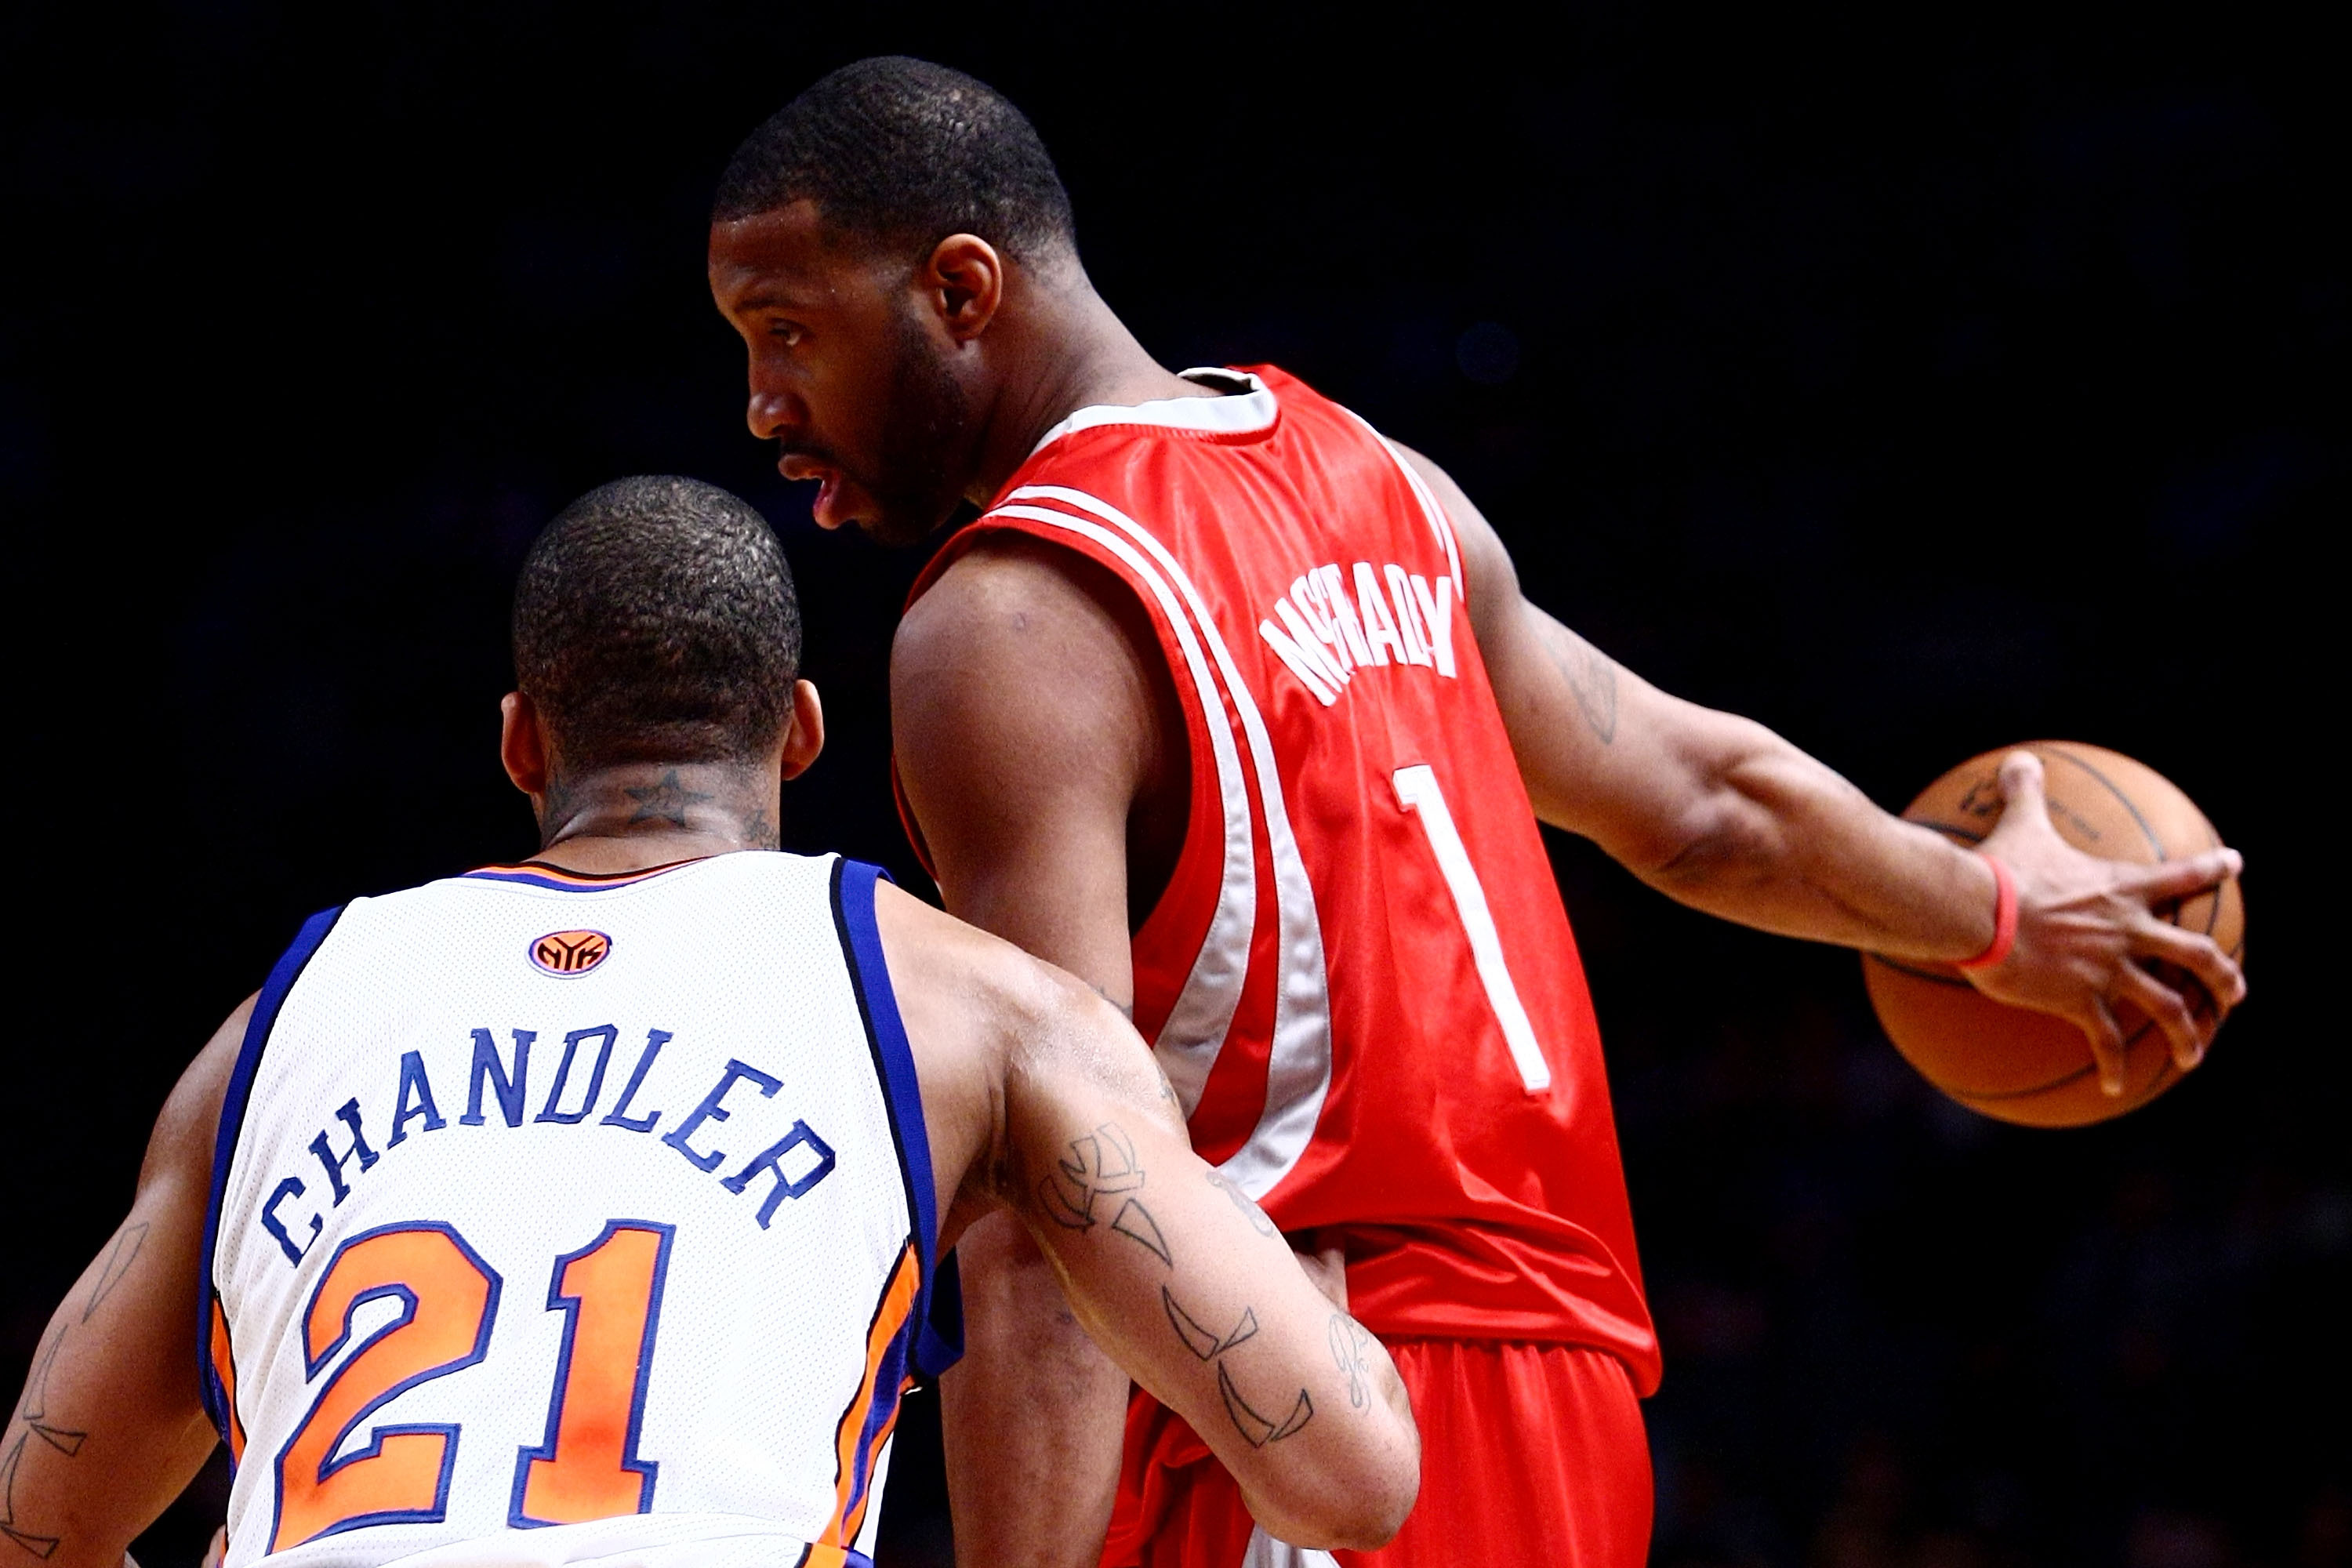 Tracy McGrady On Which Current NBA Players Remind Him Of Himself